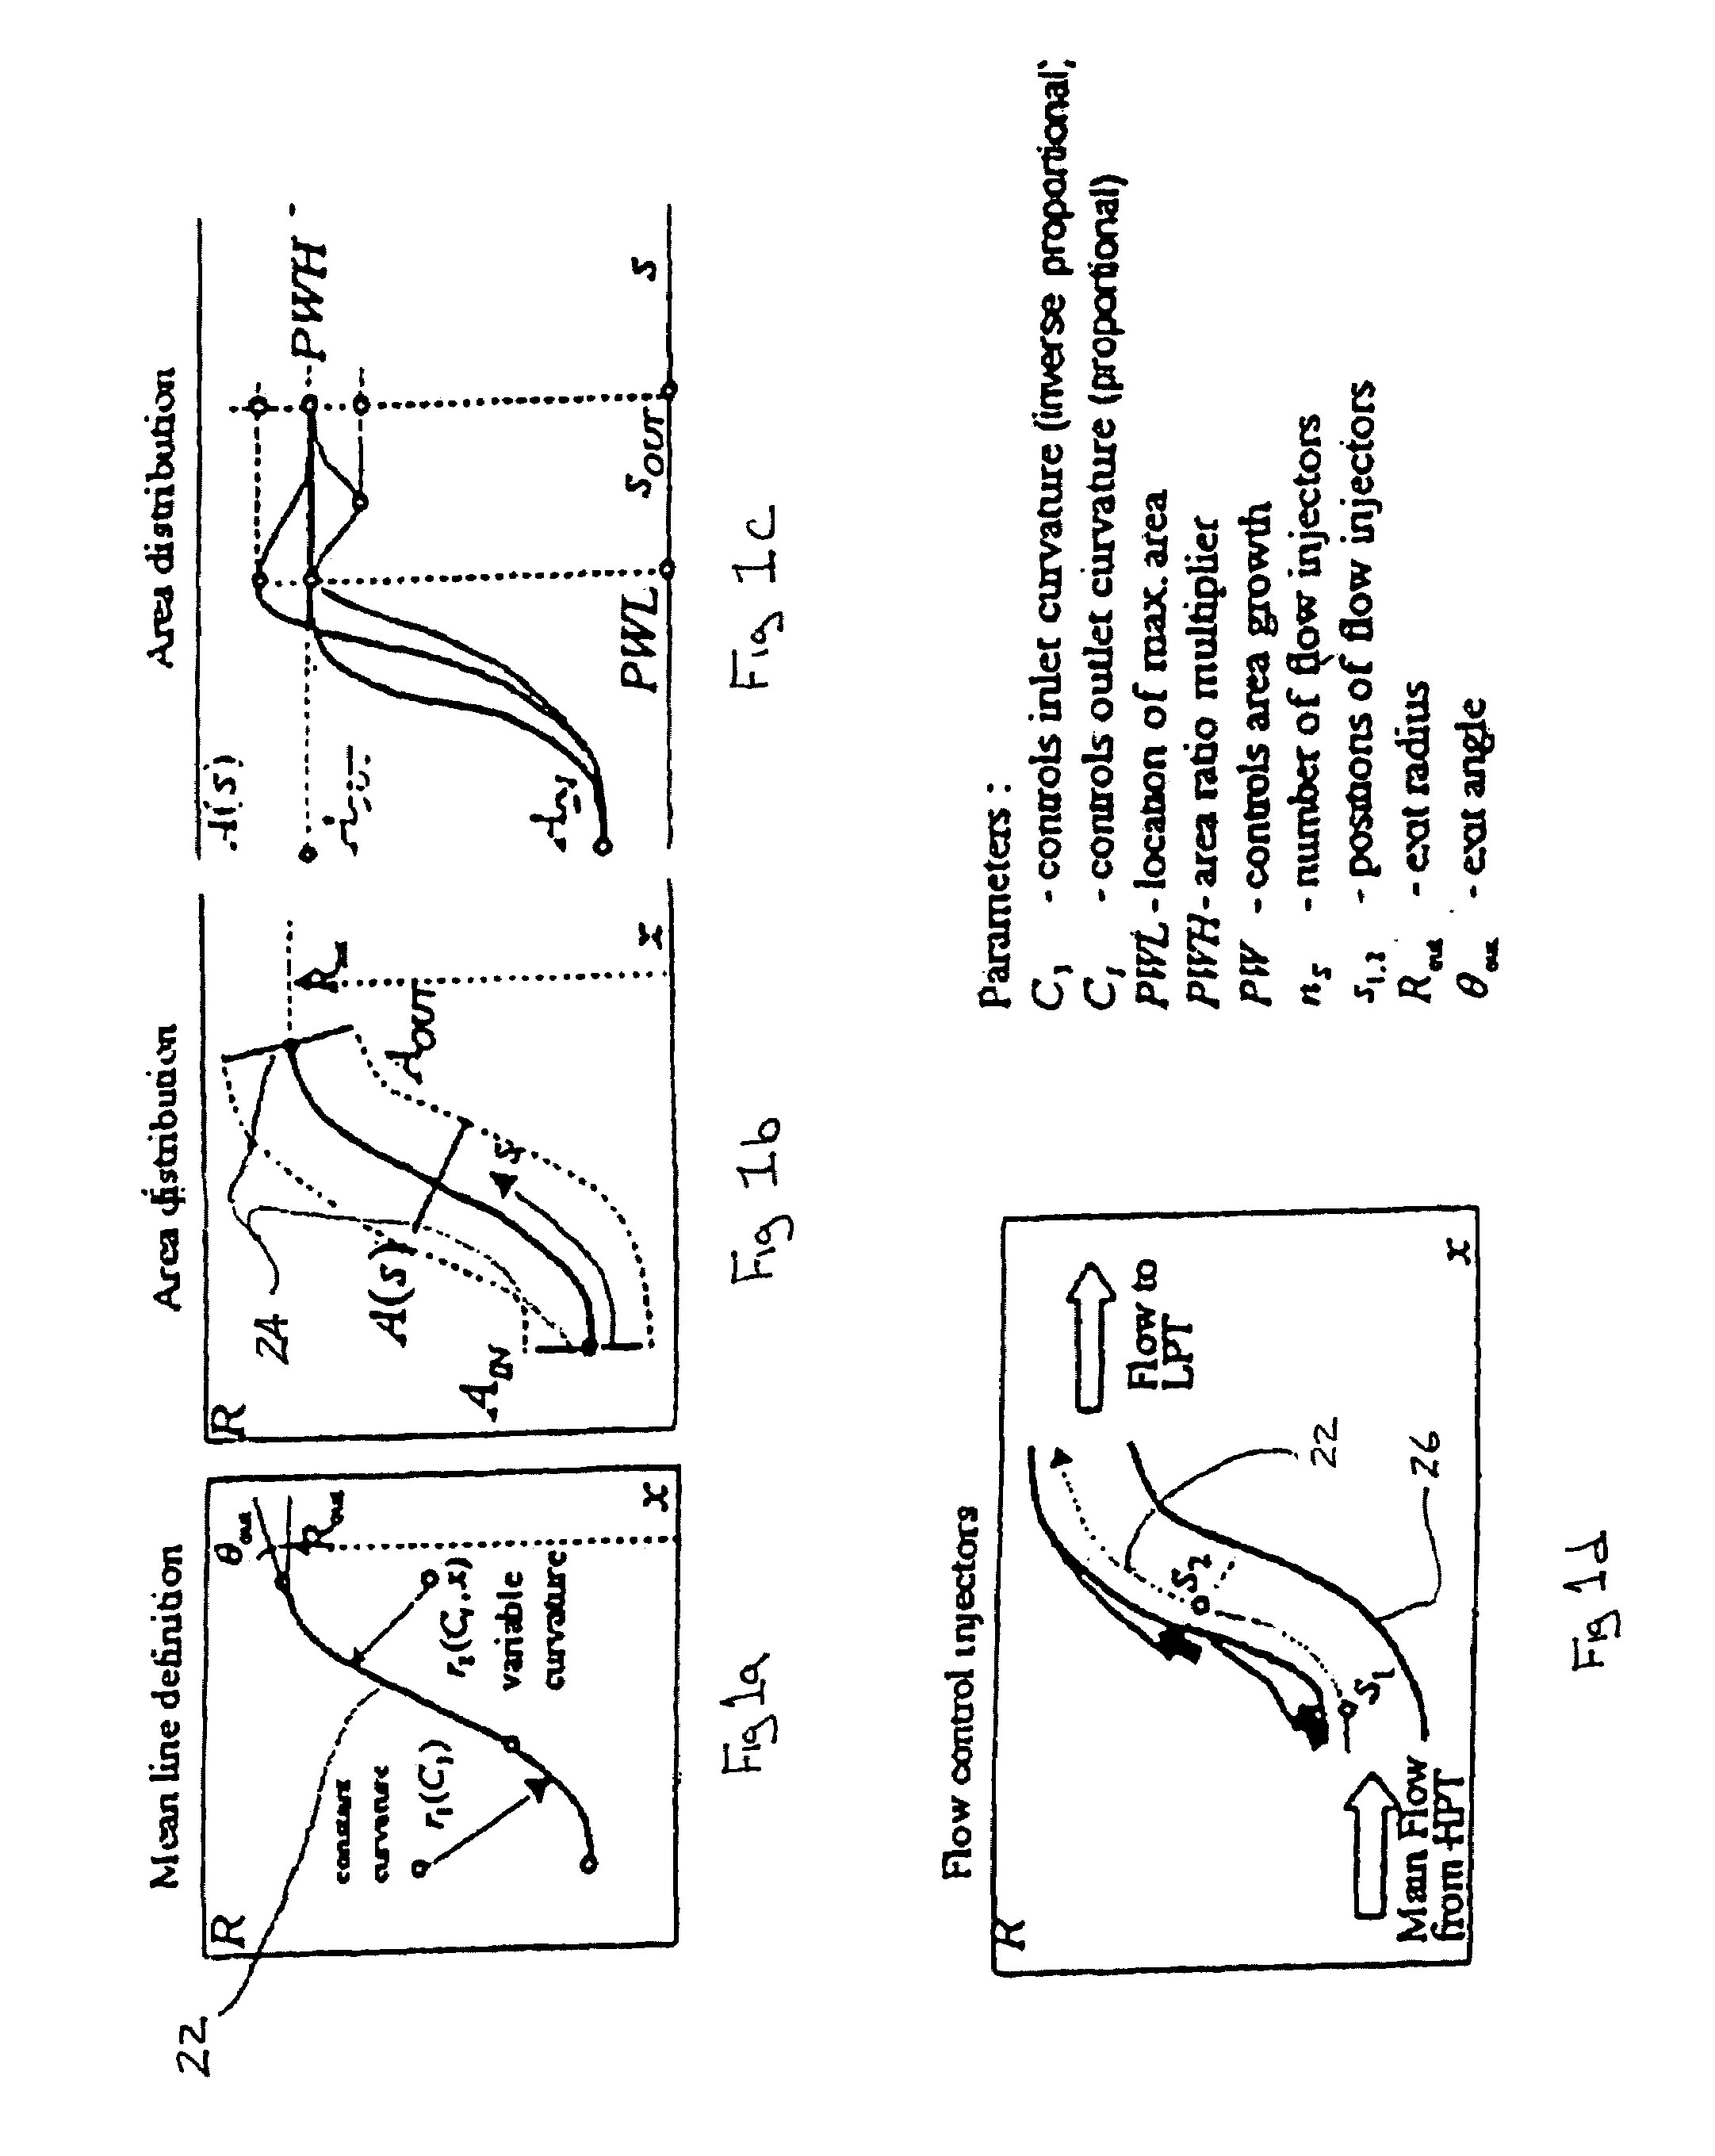 Coupled parametric design of flow control and duct shape